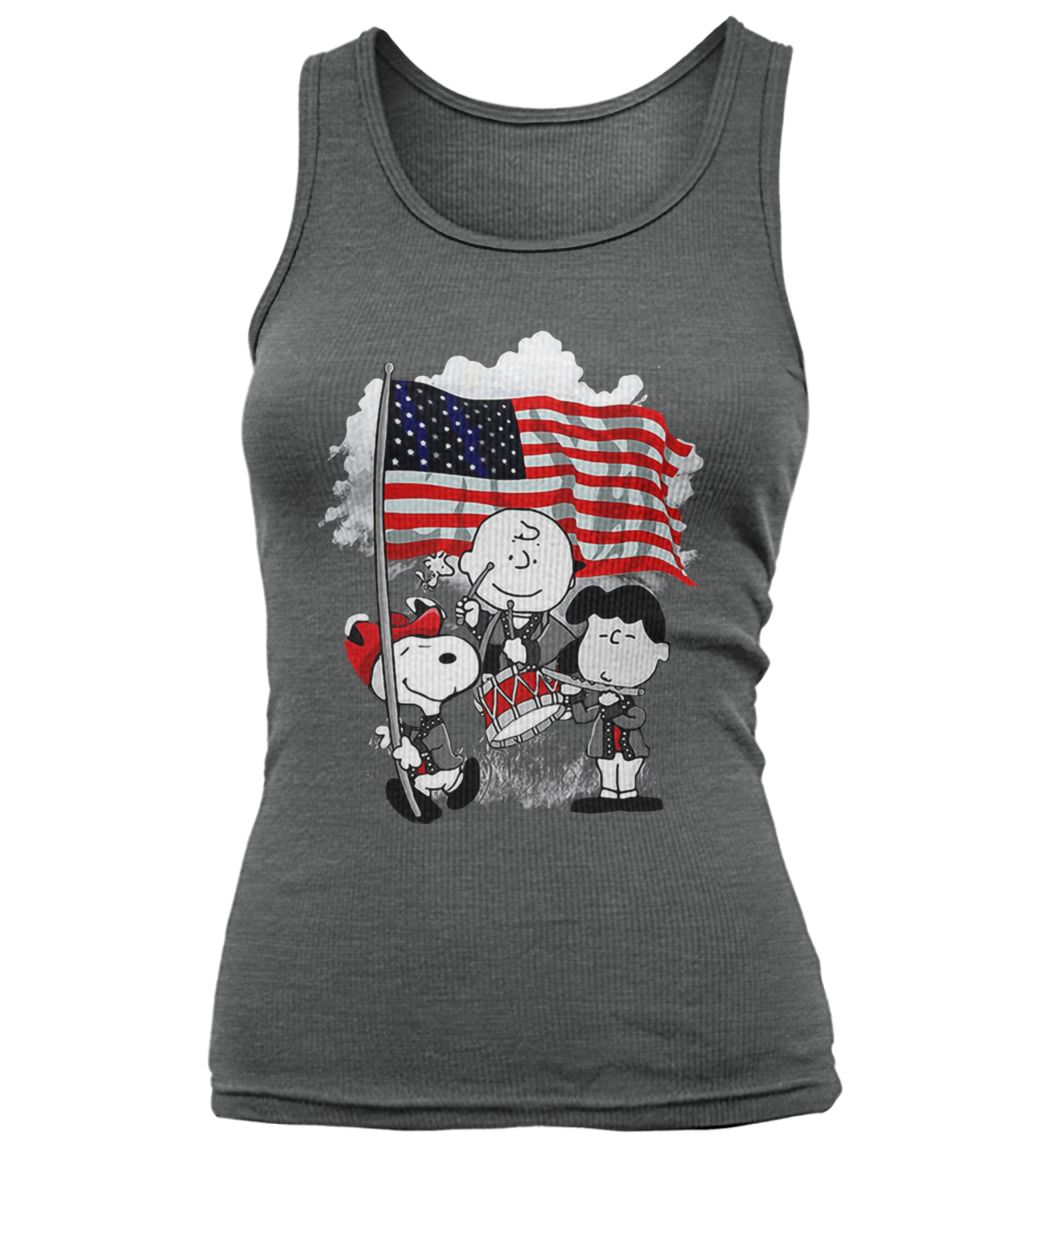 Snoopy charlie brown and lucy with american flag women's tank top